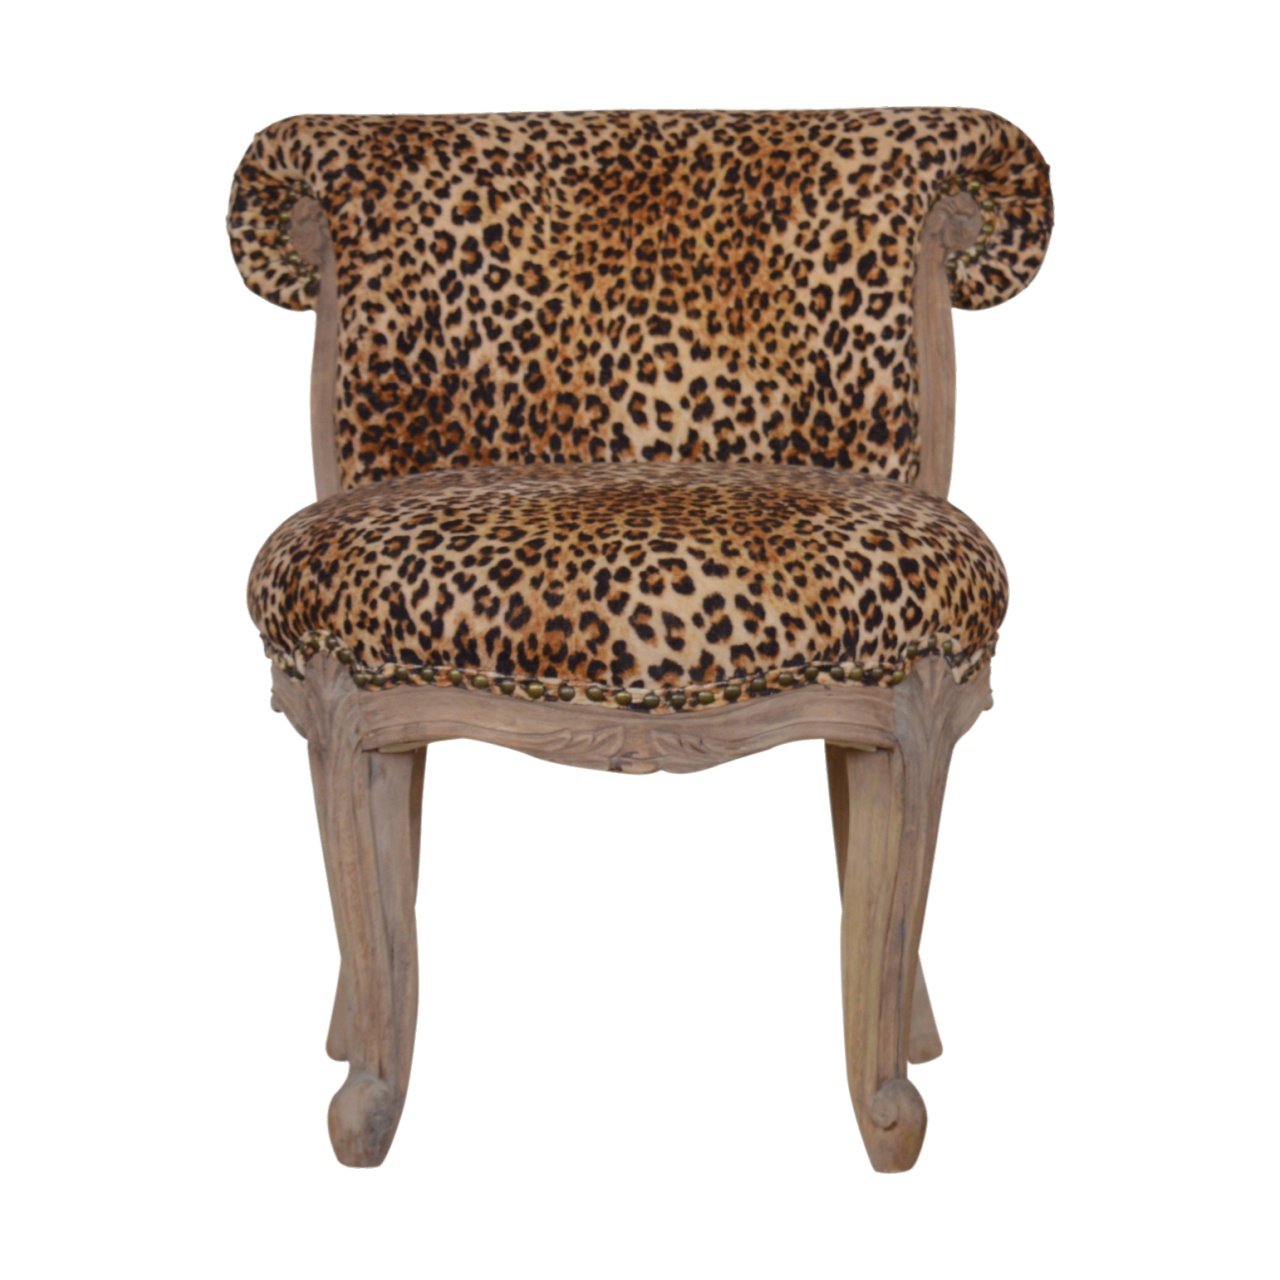 View Leopard Print Studded Chair information